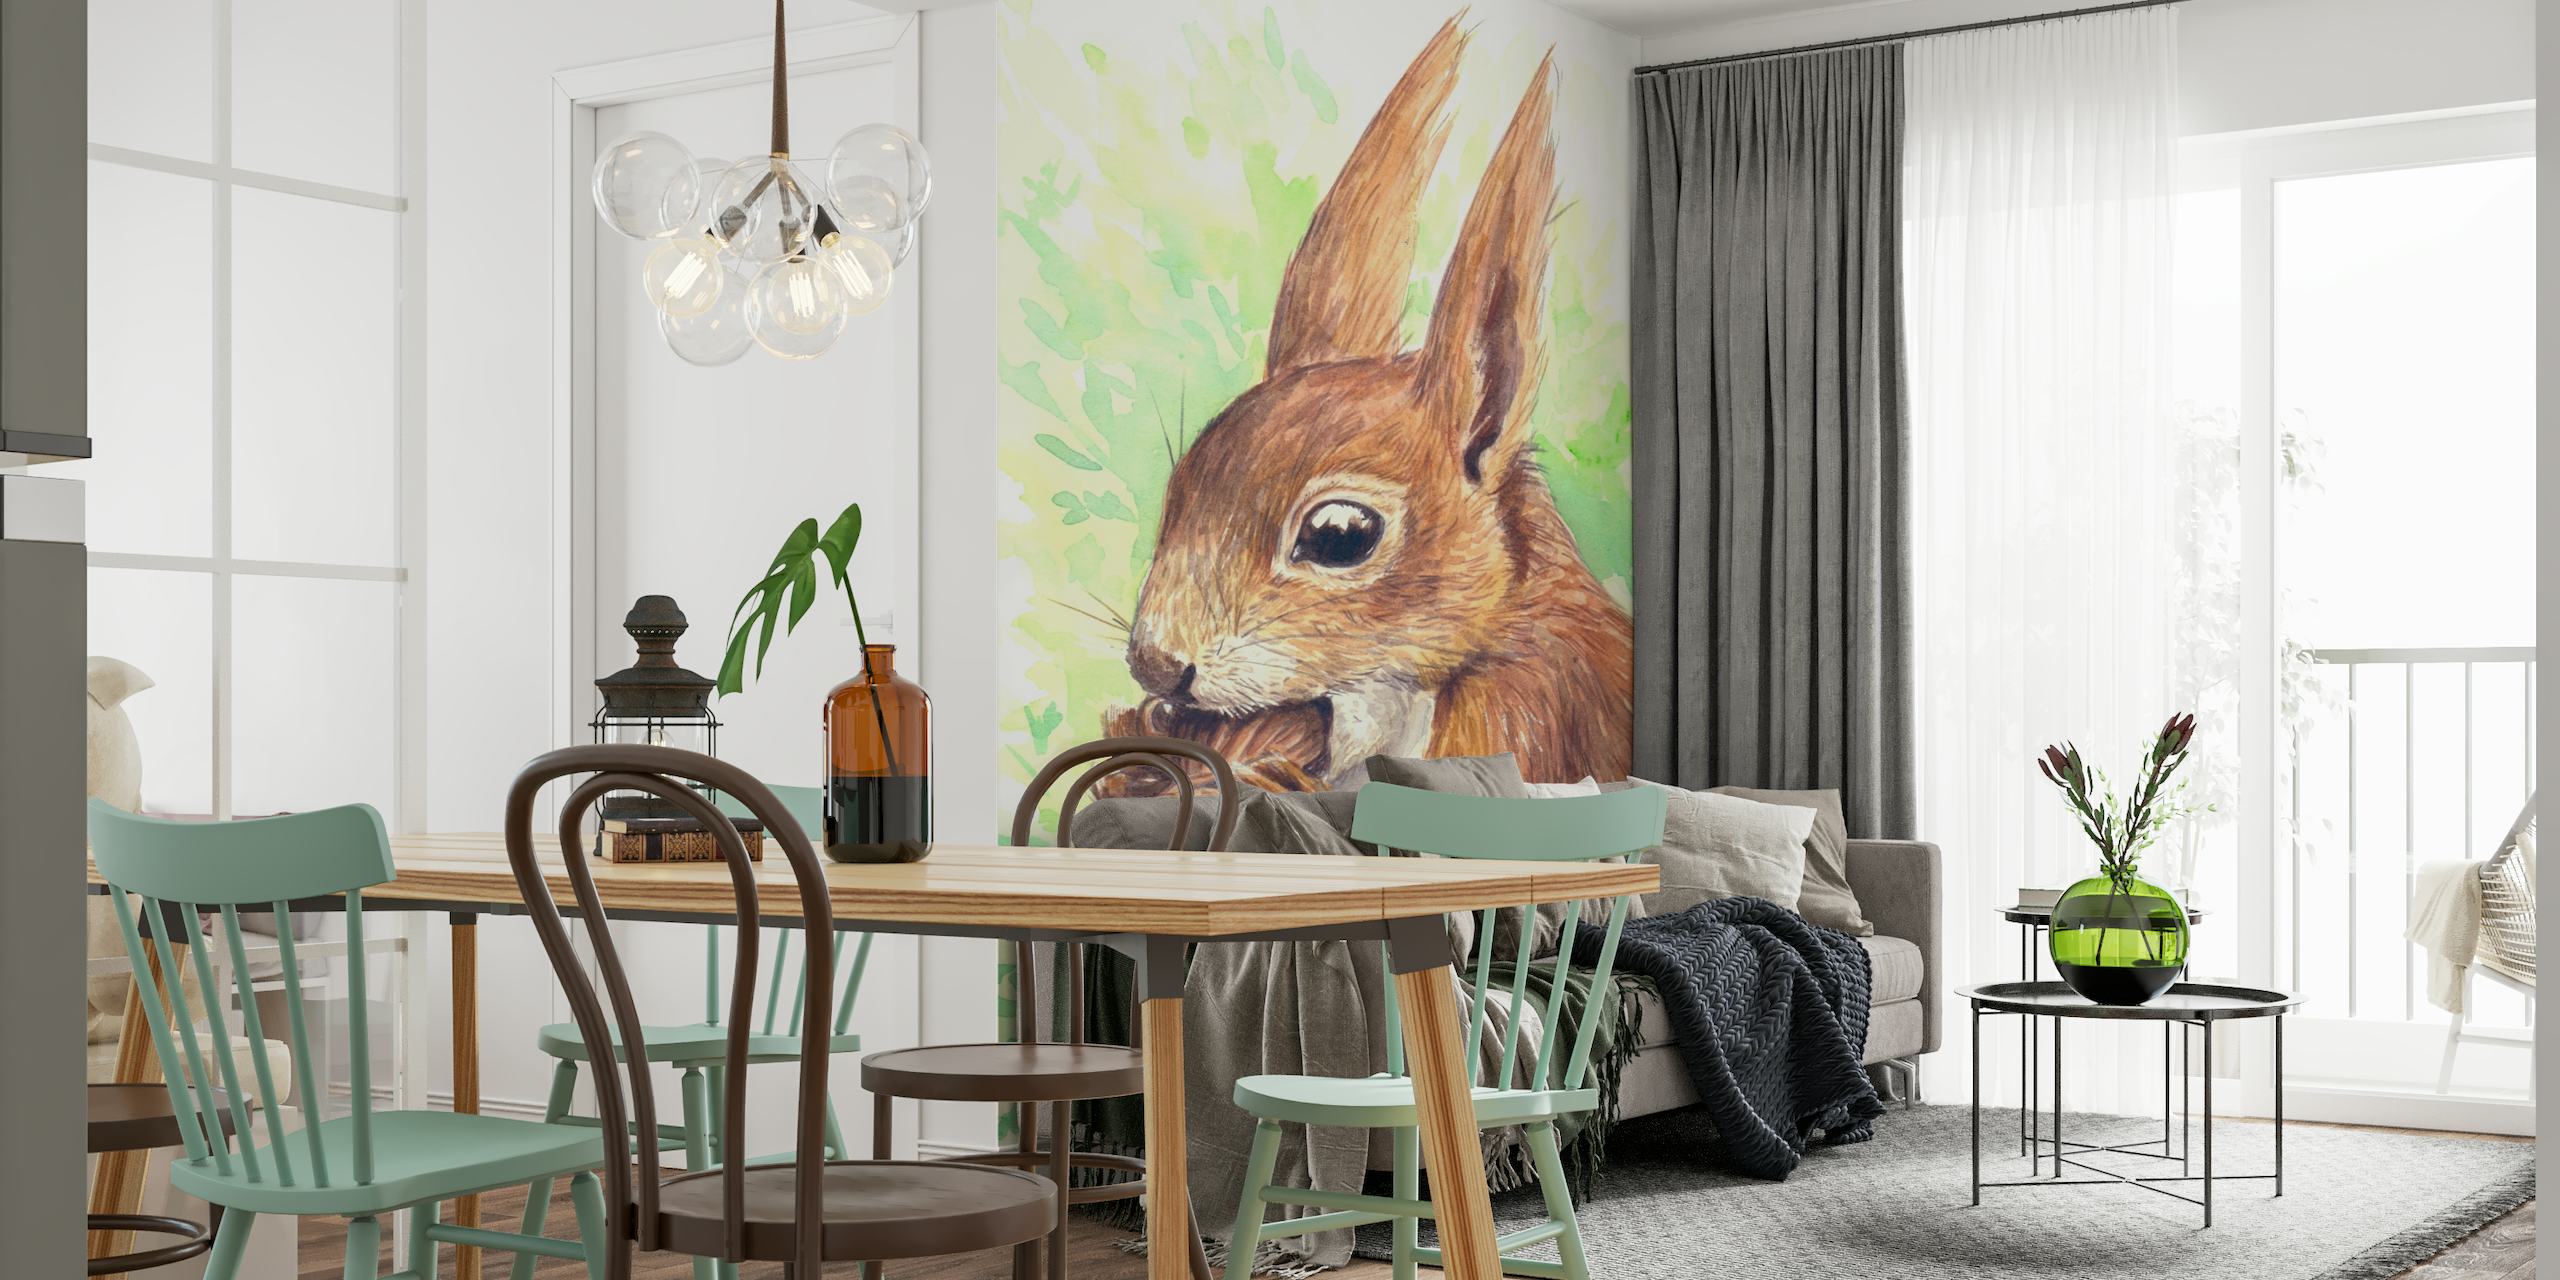 Wall mural with a detailed drawing of a squirrel surrounded by green foliage